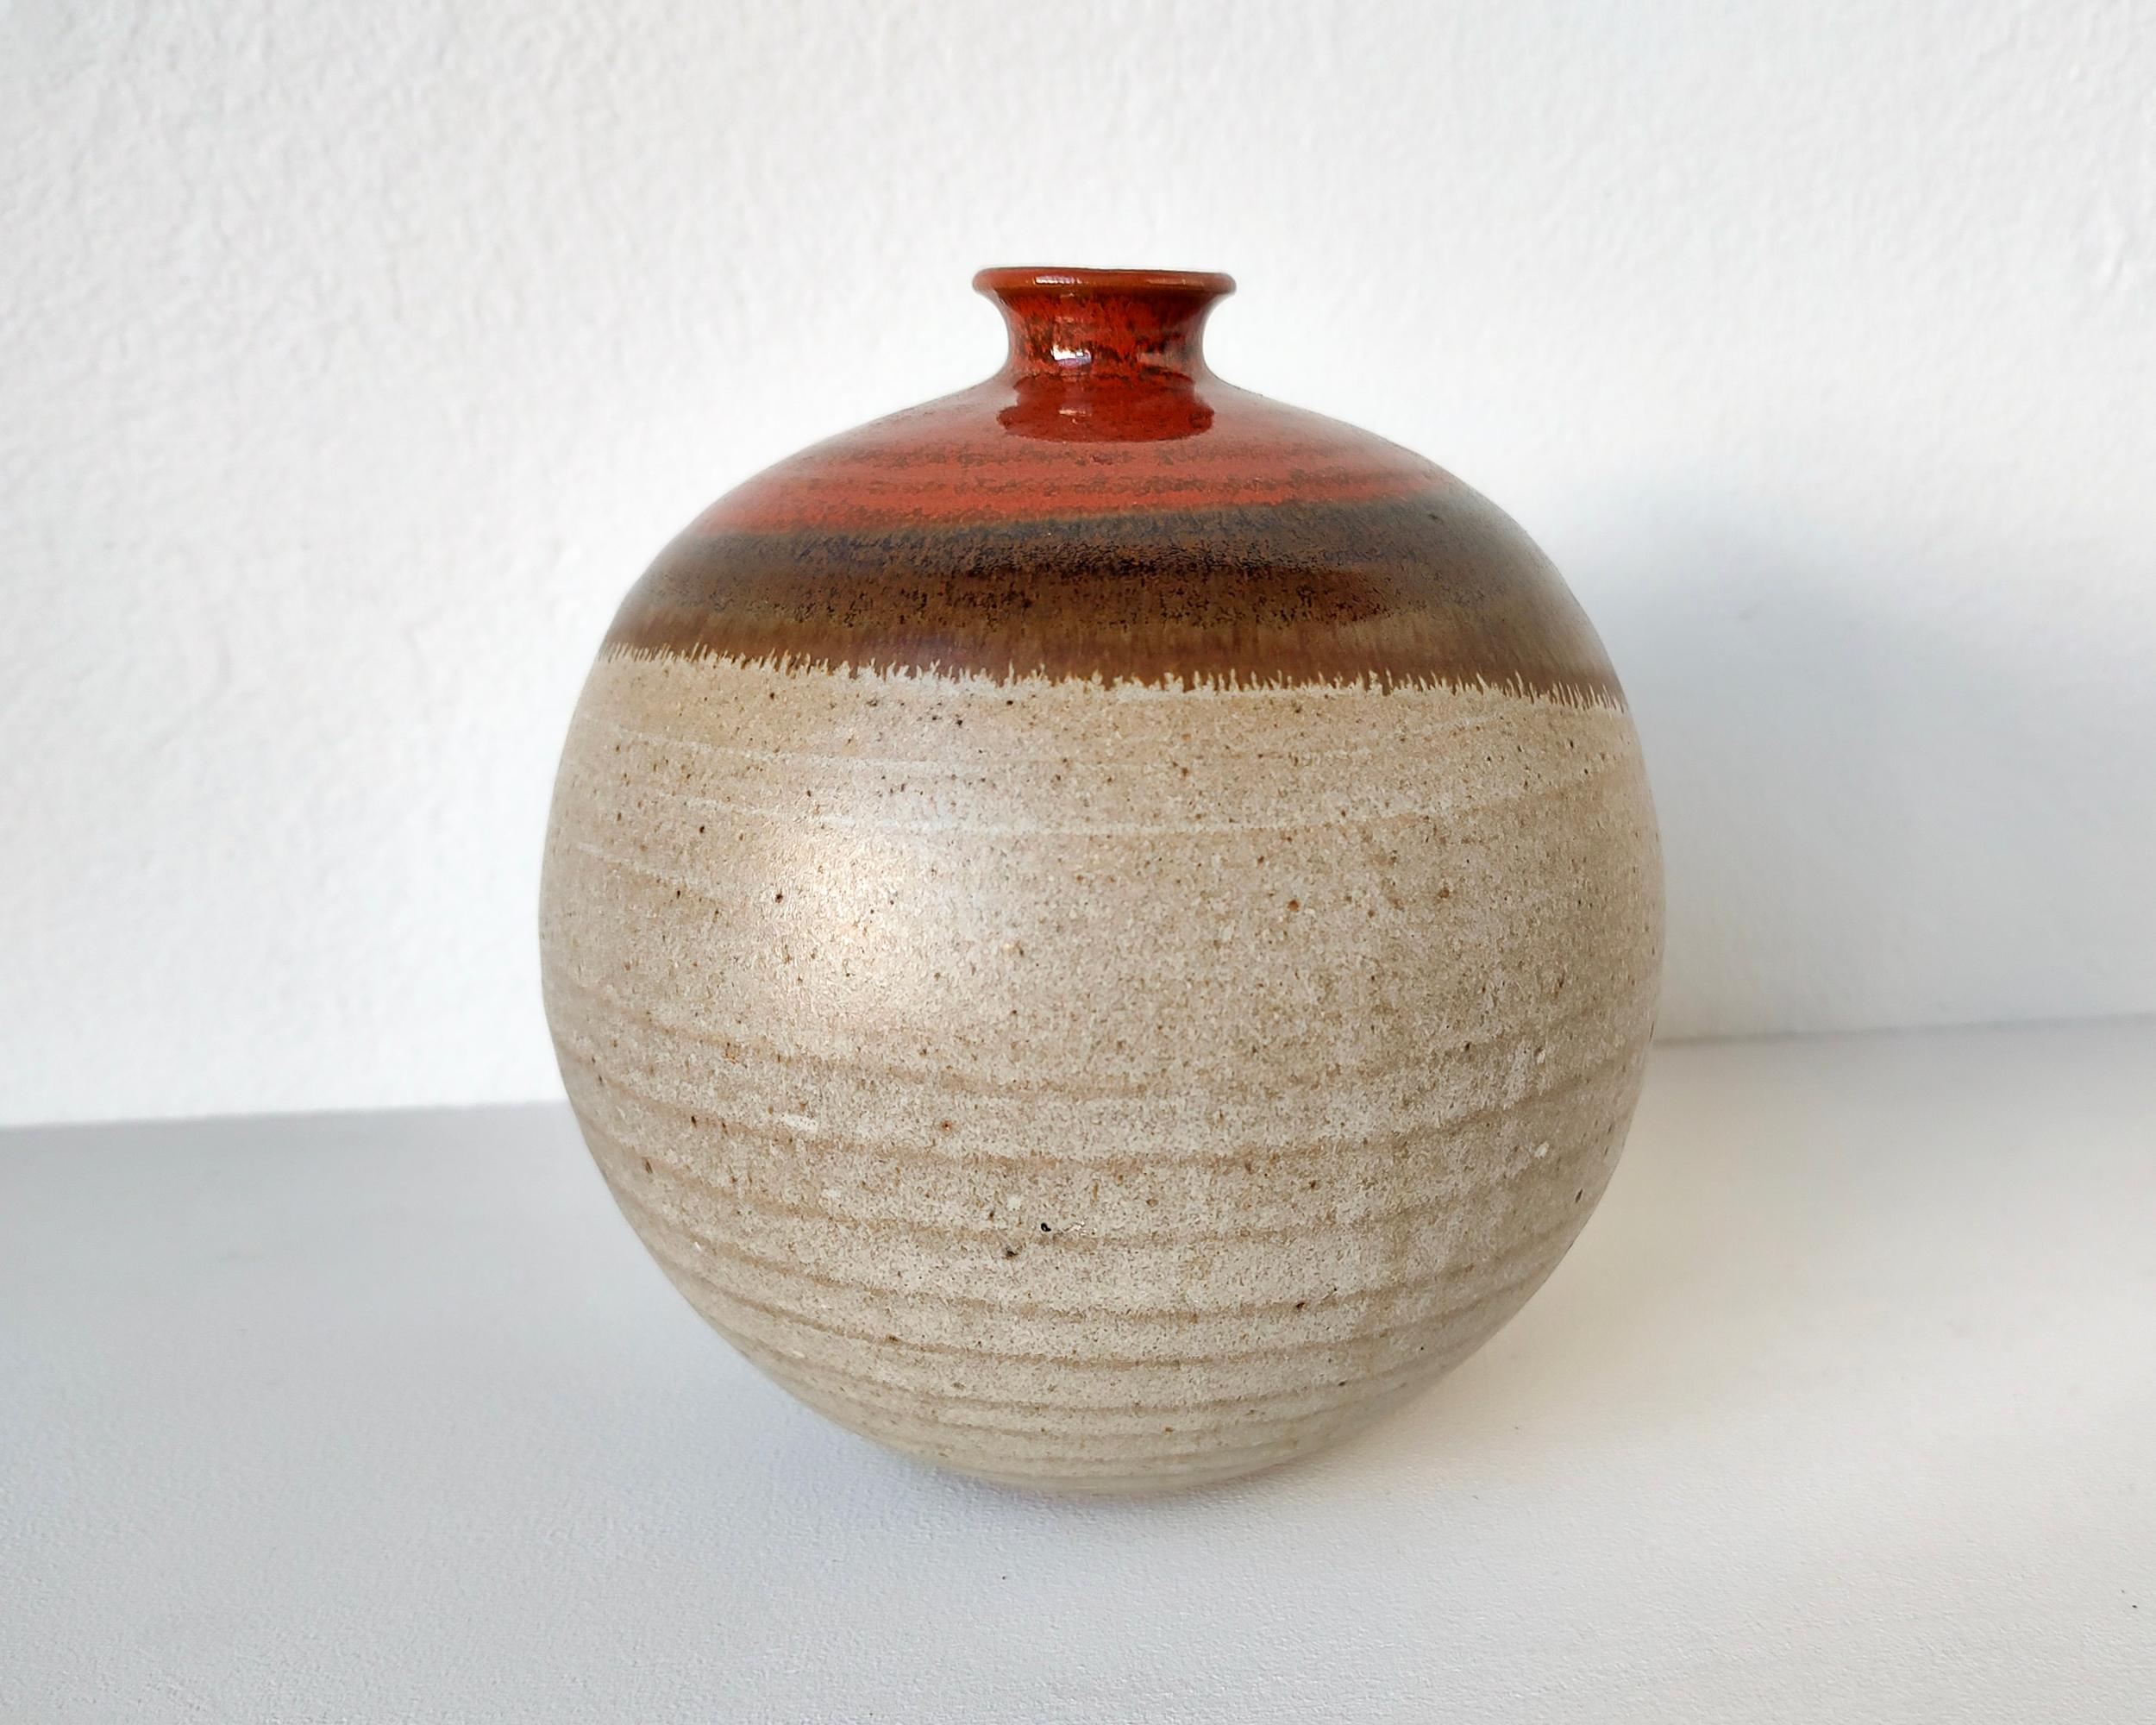 Wheel thrown stoneware orb-shaped vase with a narrow neck. Studio ceramic vessel made beautifully with visible throwlines and a hidden foot. Red iron glaze over a matte white glaze are layered to create an overlapping glaze design.